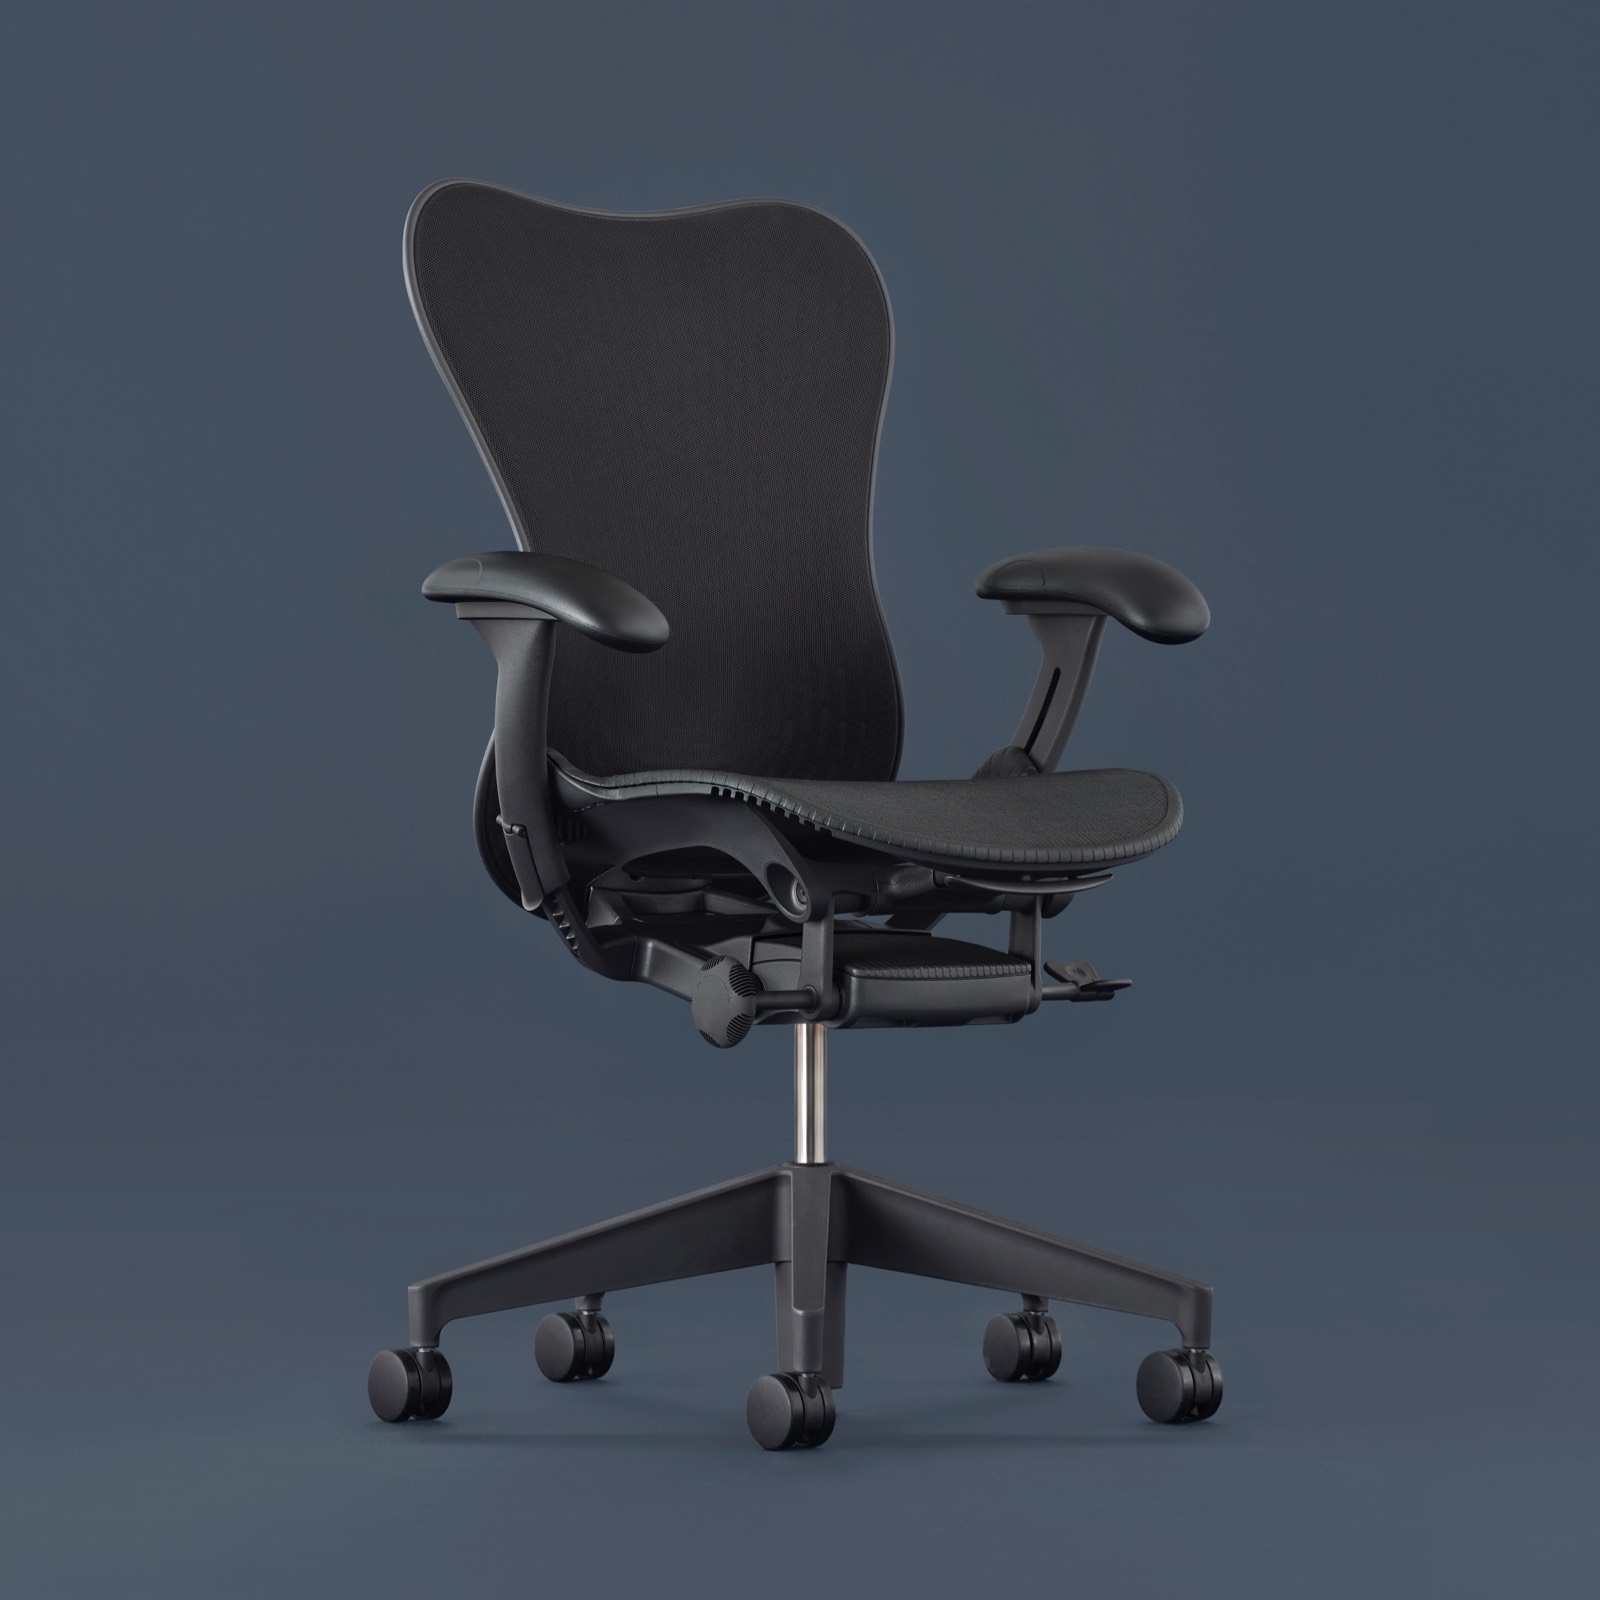 A full view of the Mirra 2 Chair swiveled 45 degrees to the right.